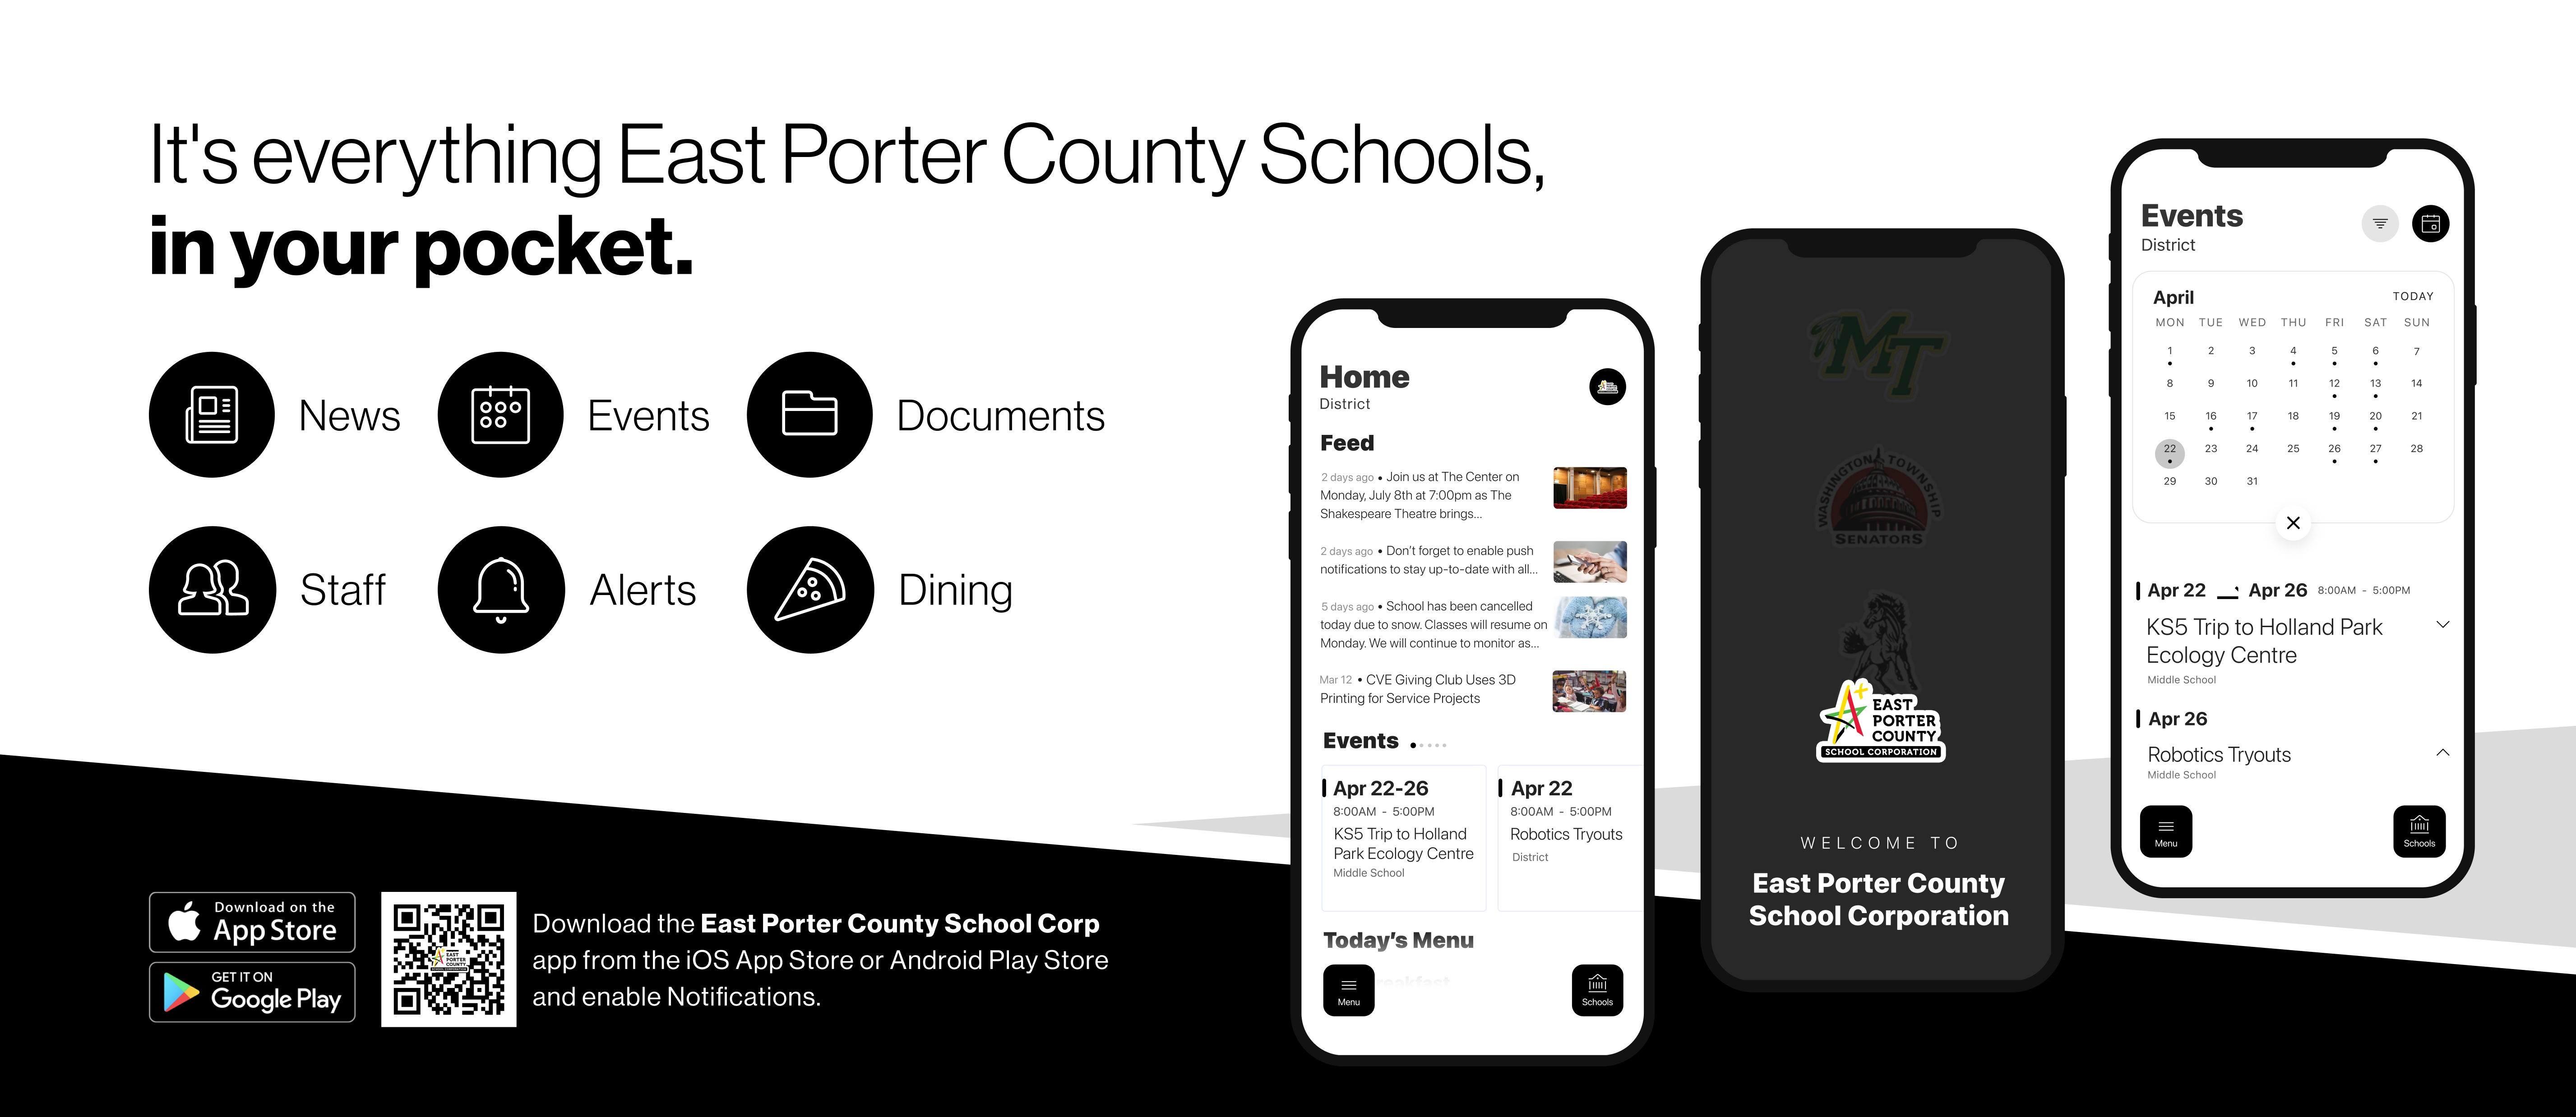 Promotional image for the school app. Its everything East Porter County Schools in your pocket   District News Events Documents Feed Staff Alerts Download the East Porter County School Corp app from the iOS App Store or Android Play Store